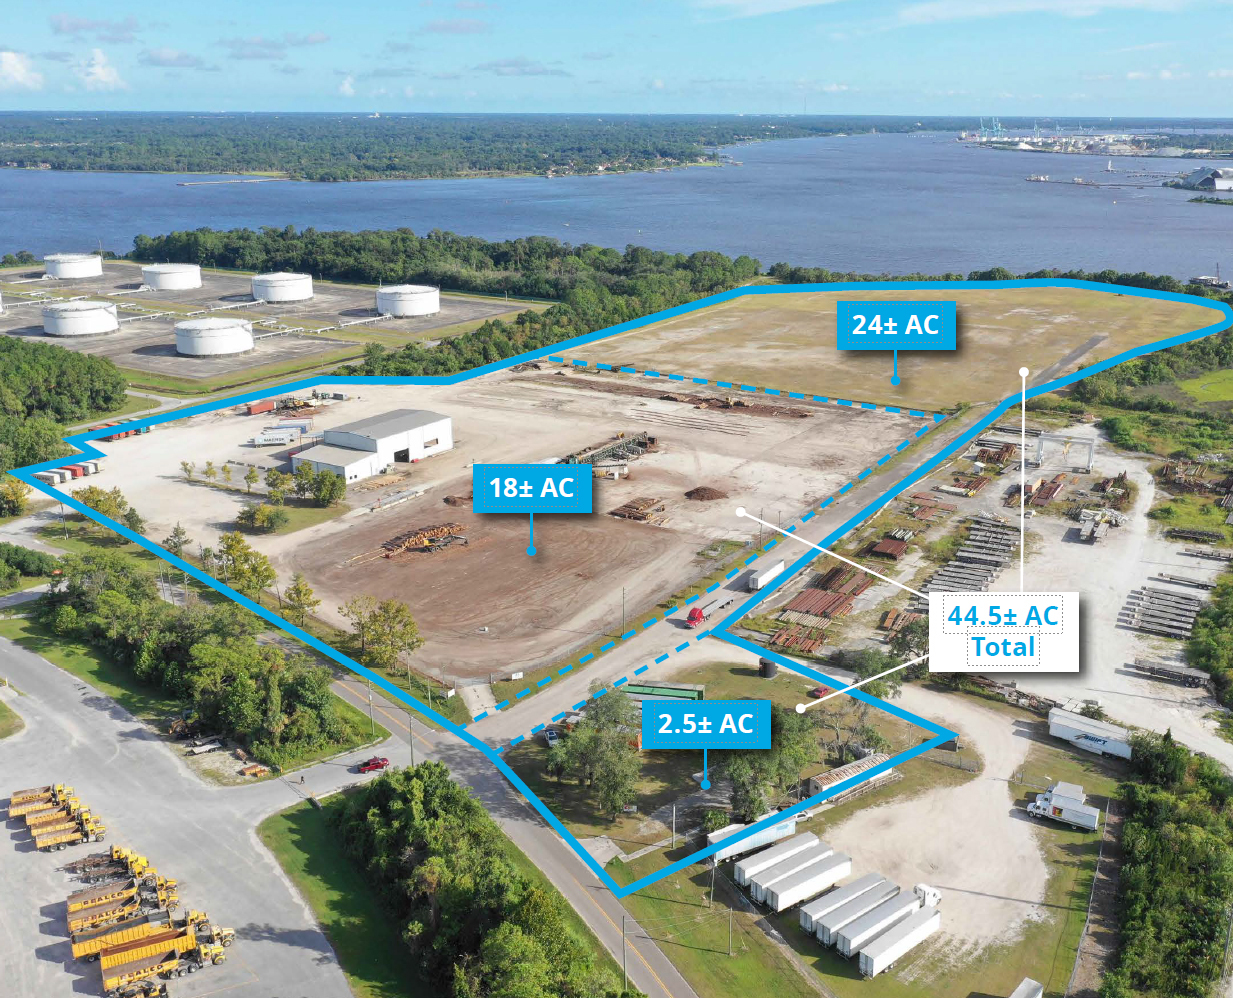 The BG Capital project is along  Somers Road. The 24-acre property along the St. Johns River is not part of the project.